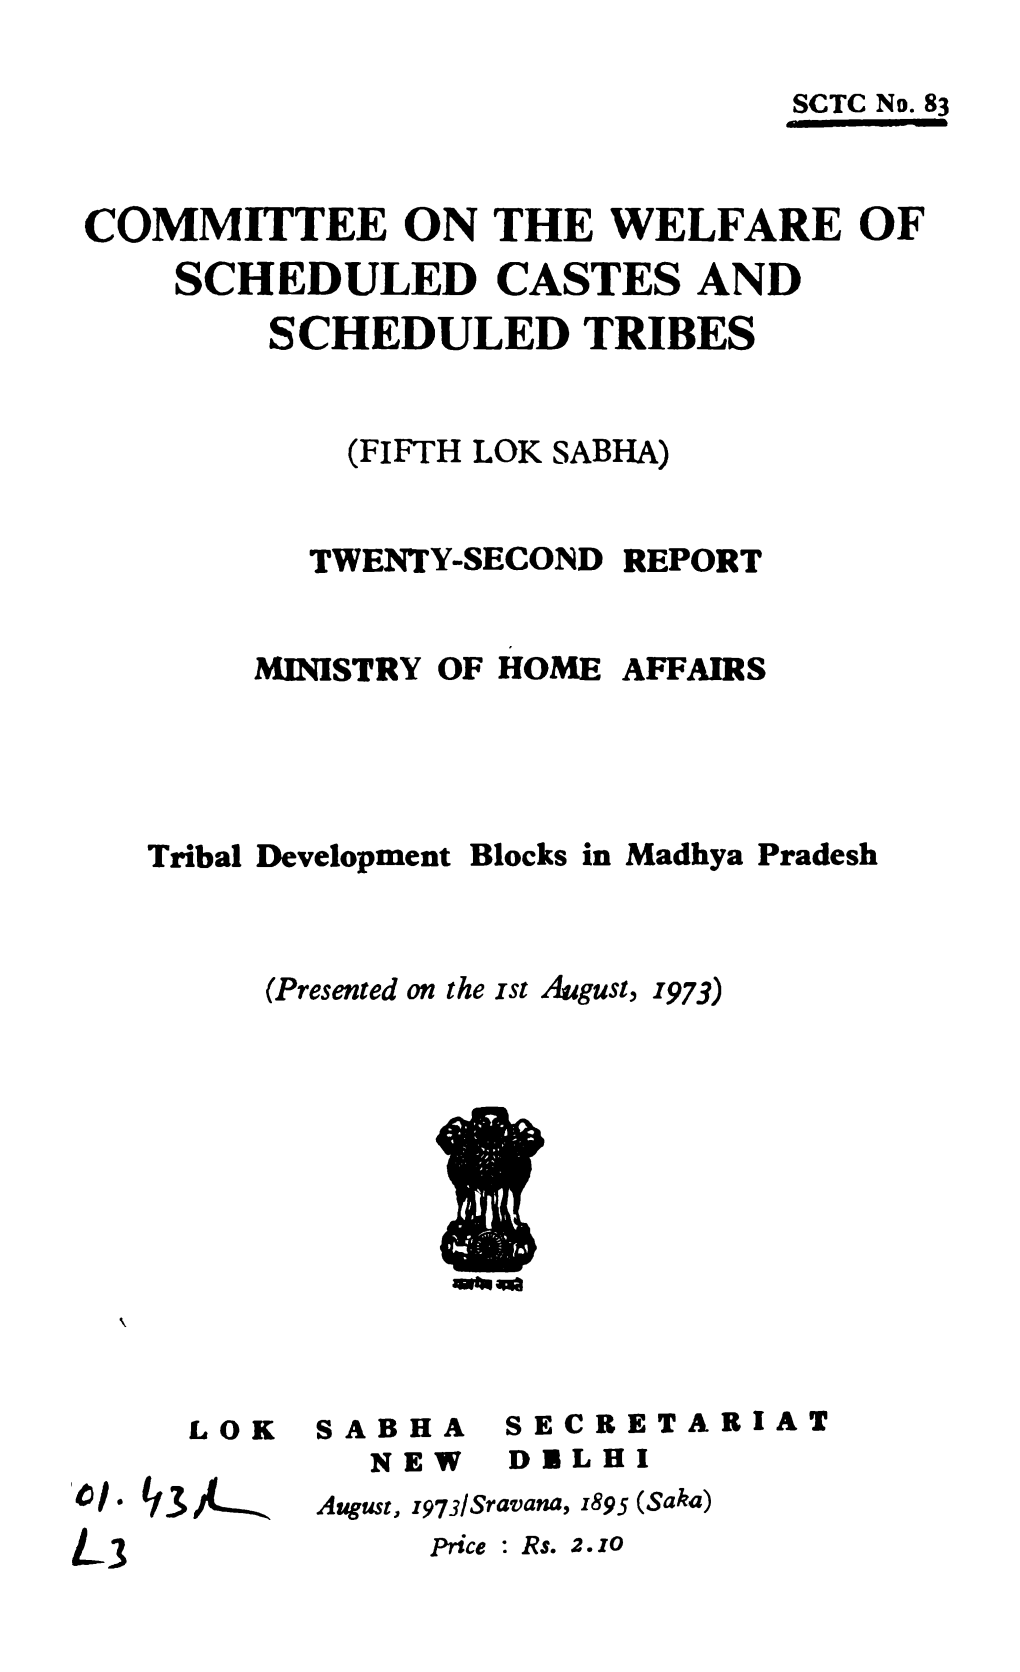 Scheduled Castes and Scheduled Tribes